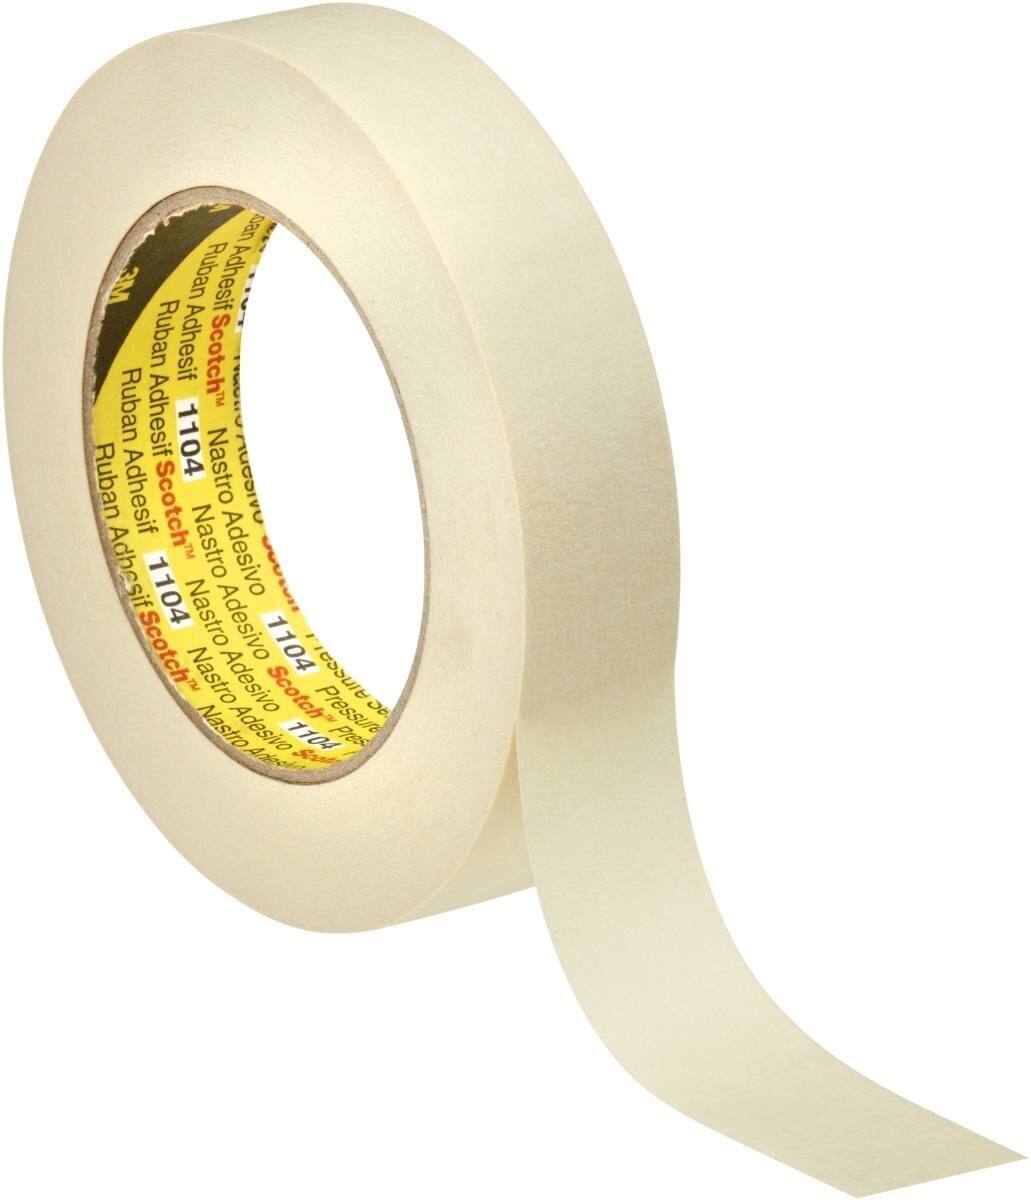  3M Scotch Special Painting Masking Tape 1104, Beige, 24 mm x 50 m, 0.155 mm, 0.155 mm